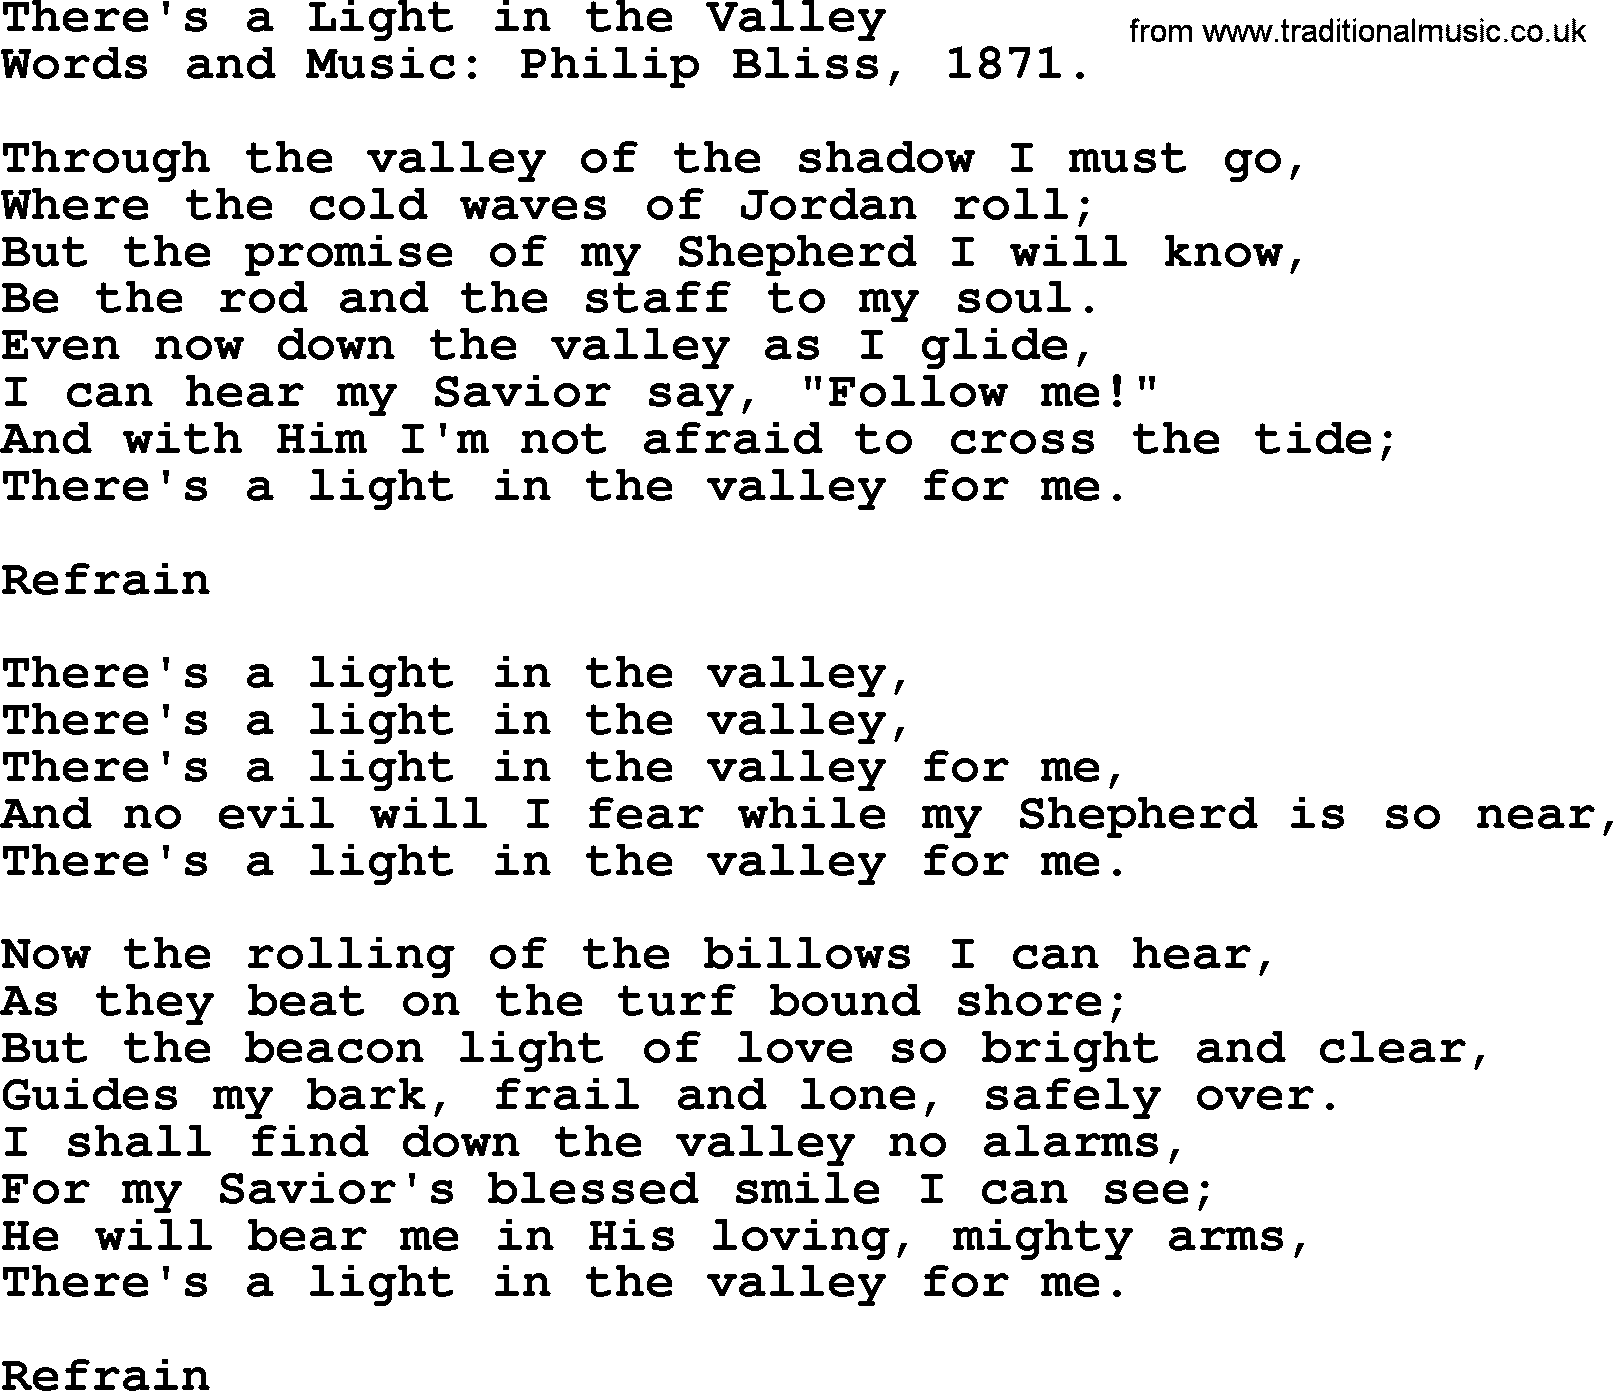 Philip Bliss Song: There's A Light In The Valley, lyrics